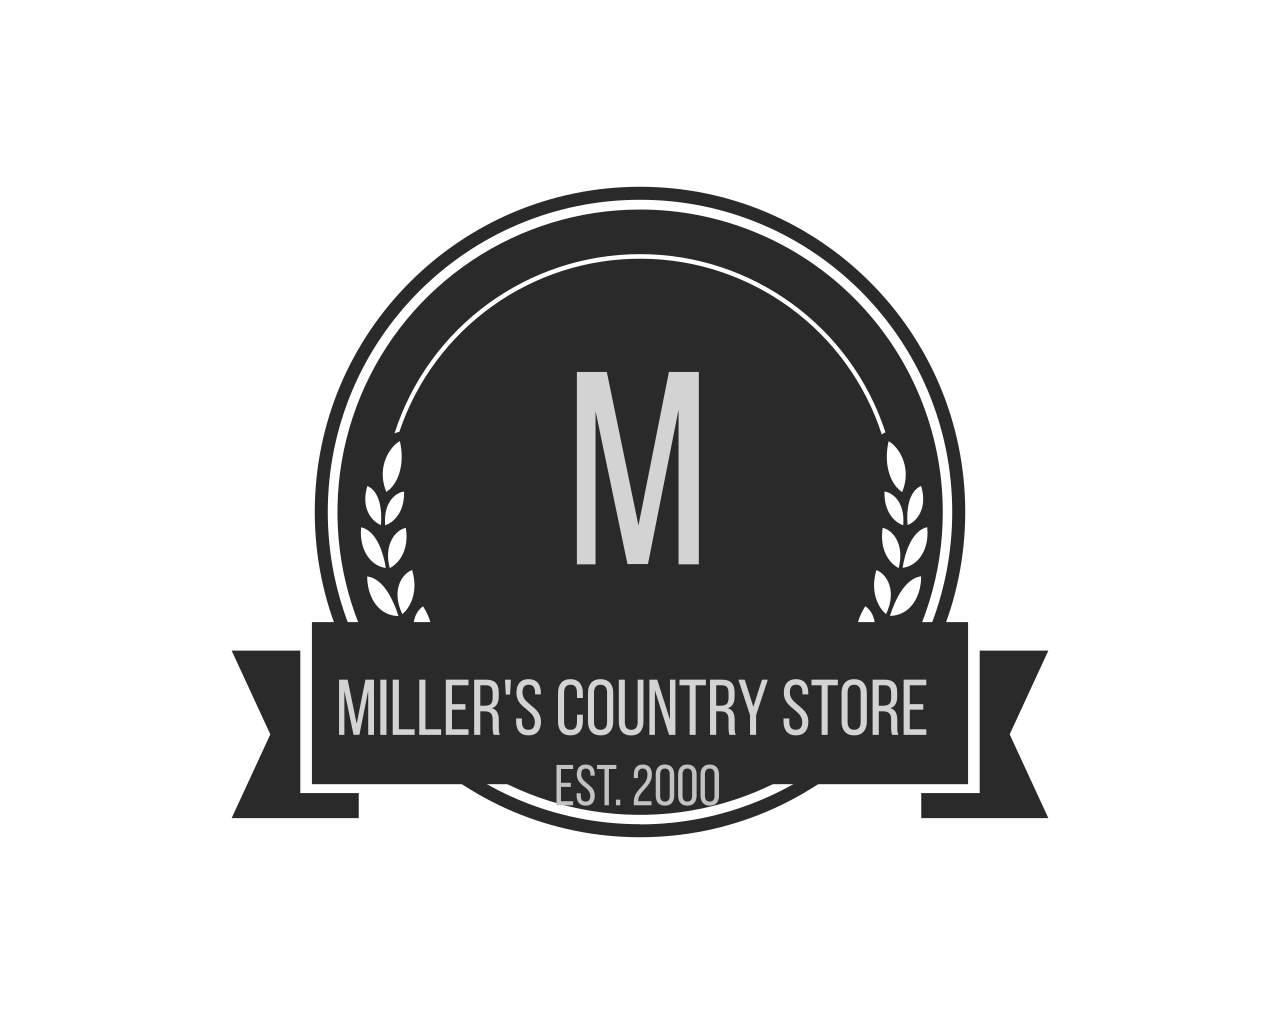 Miller's Country Store